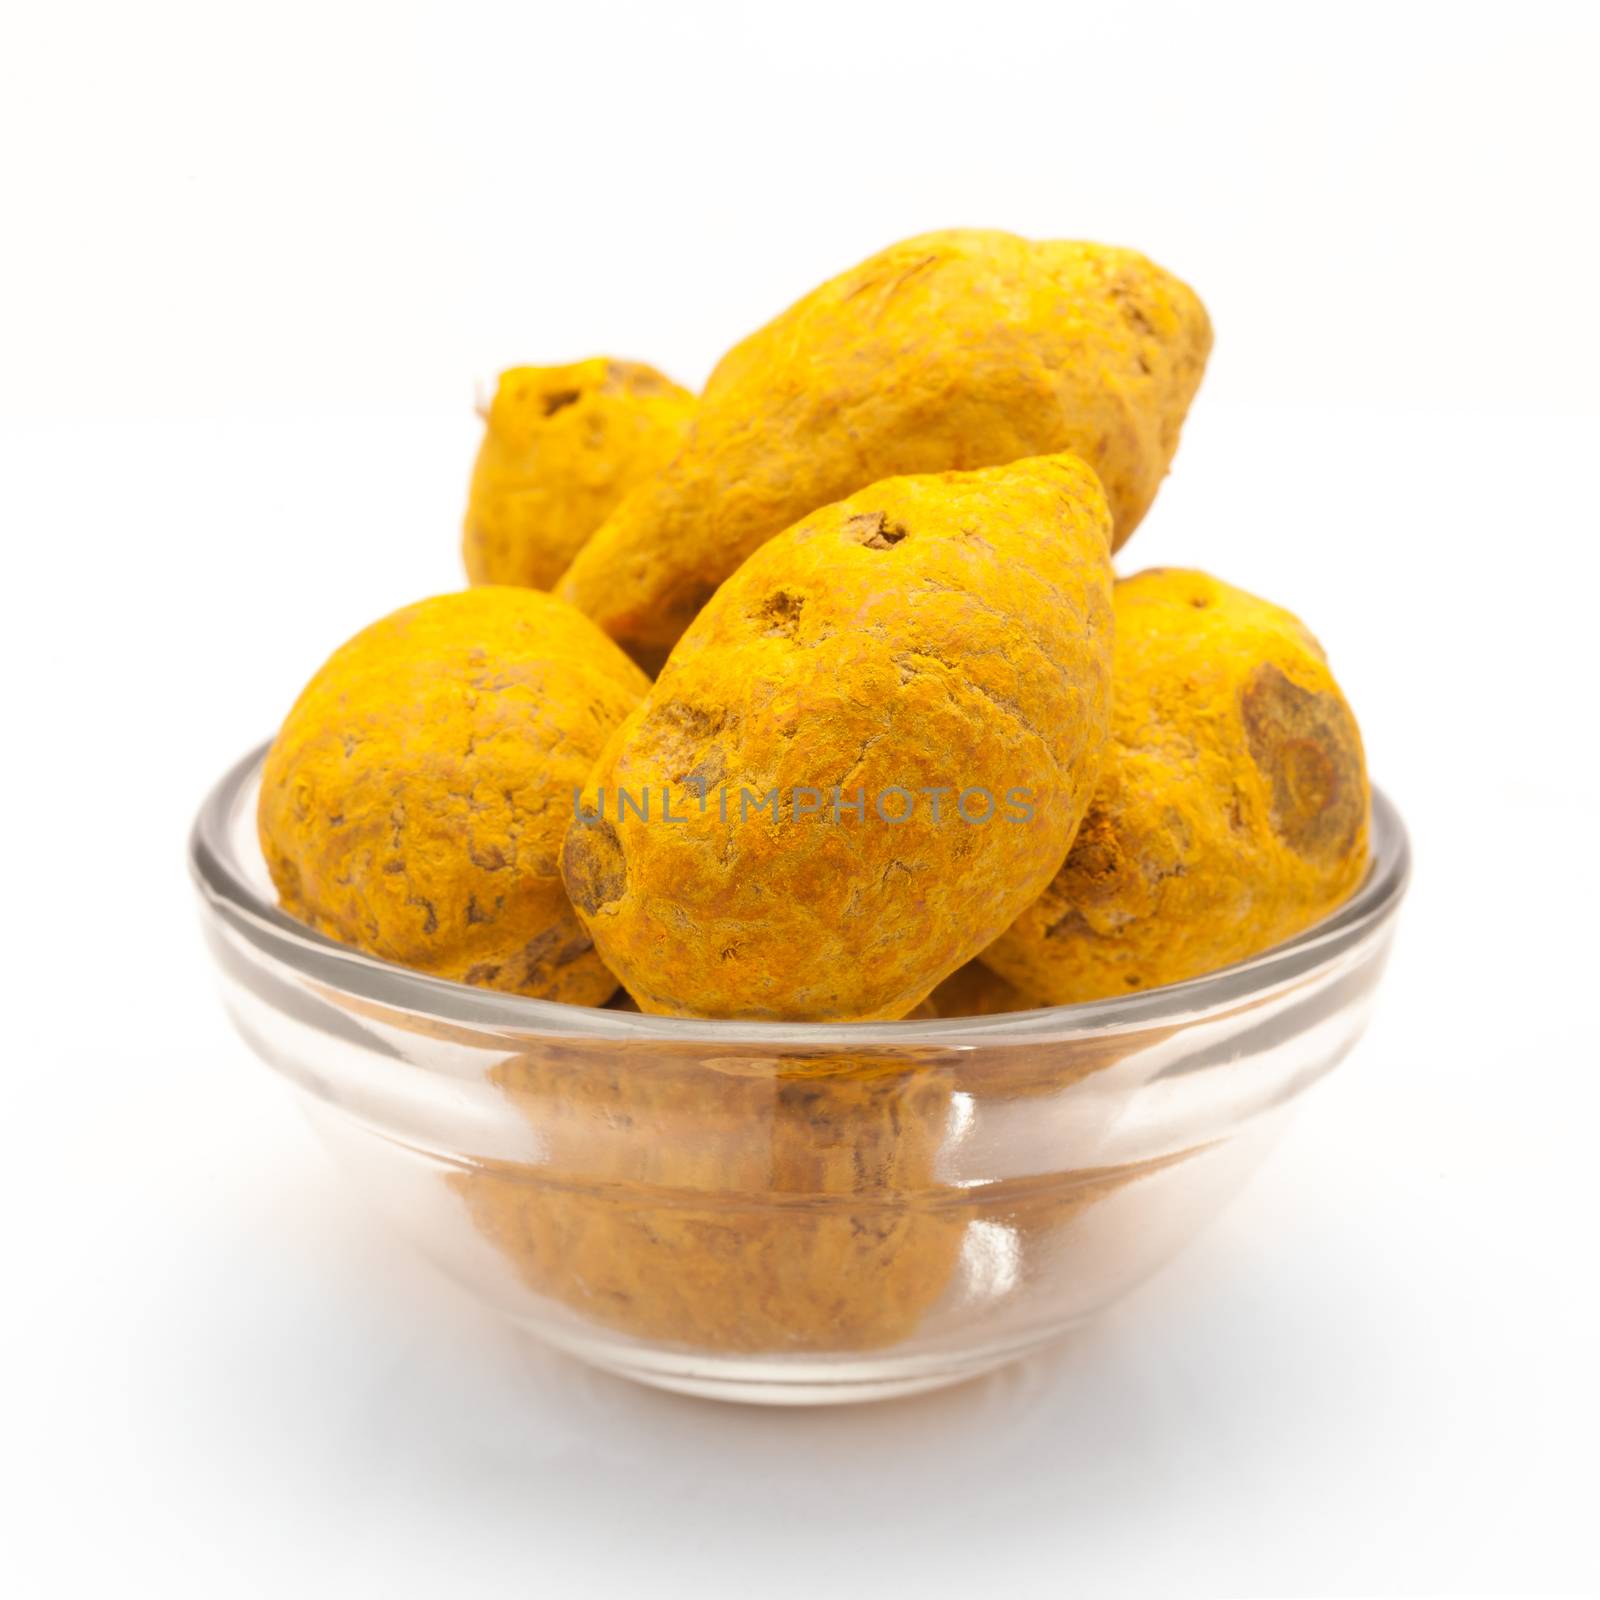 Front view of Organic Round Turmeric or Haldi (Curcuma longa) in glass bowl isolated on white background.